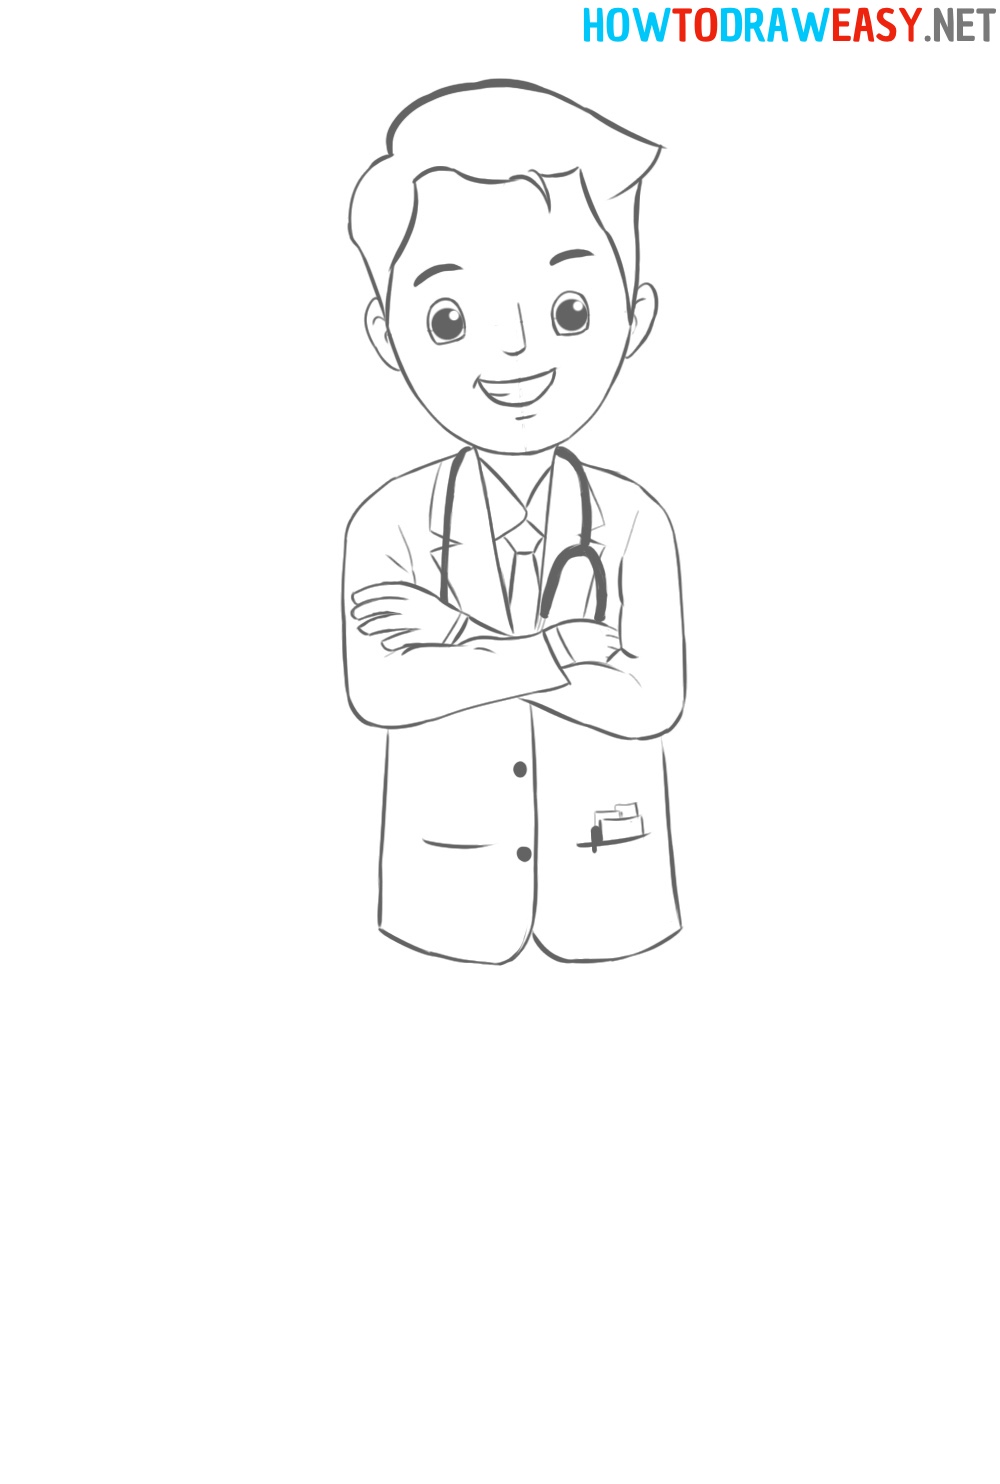 How to Draw a Cartoon Doctor